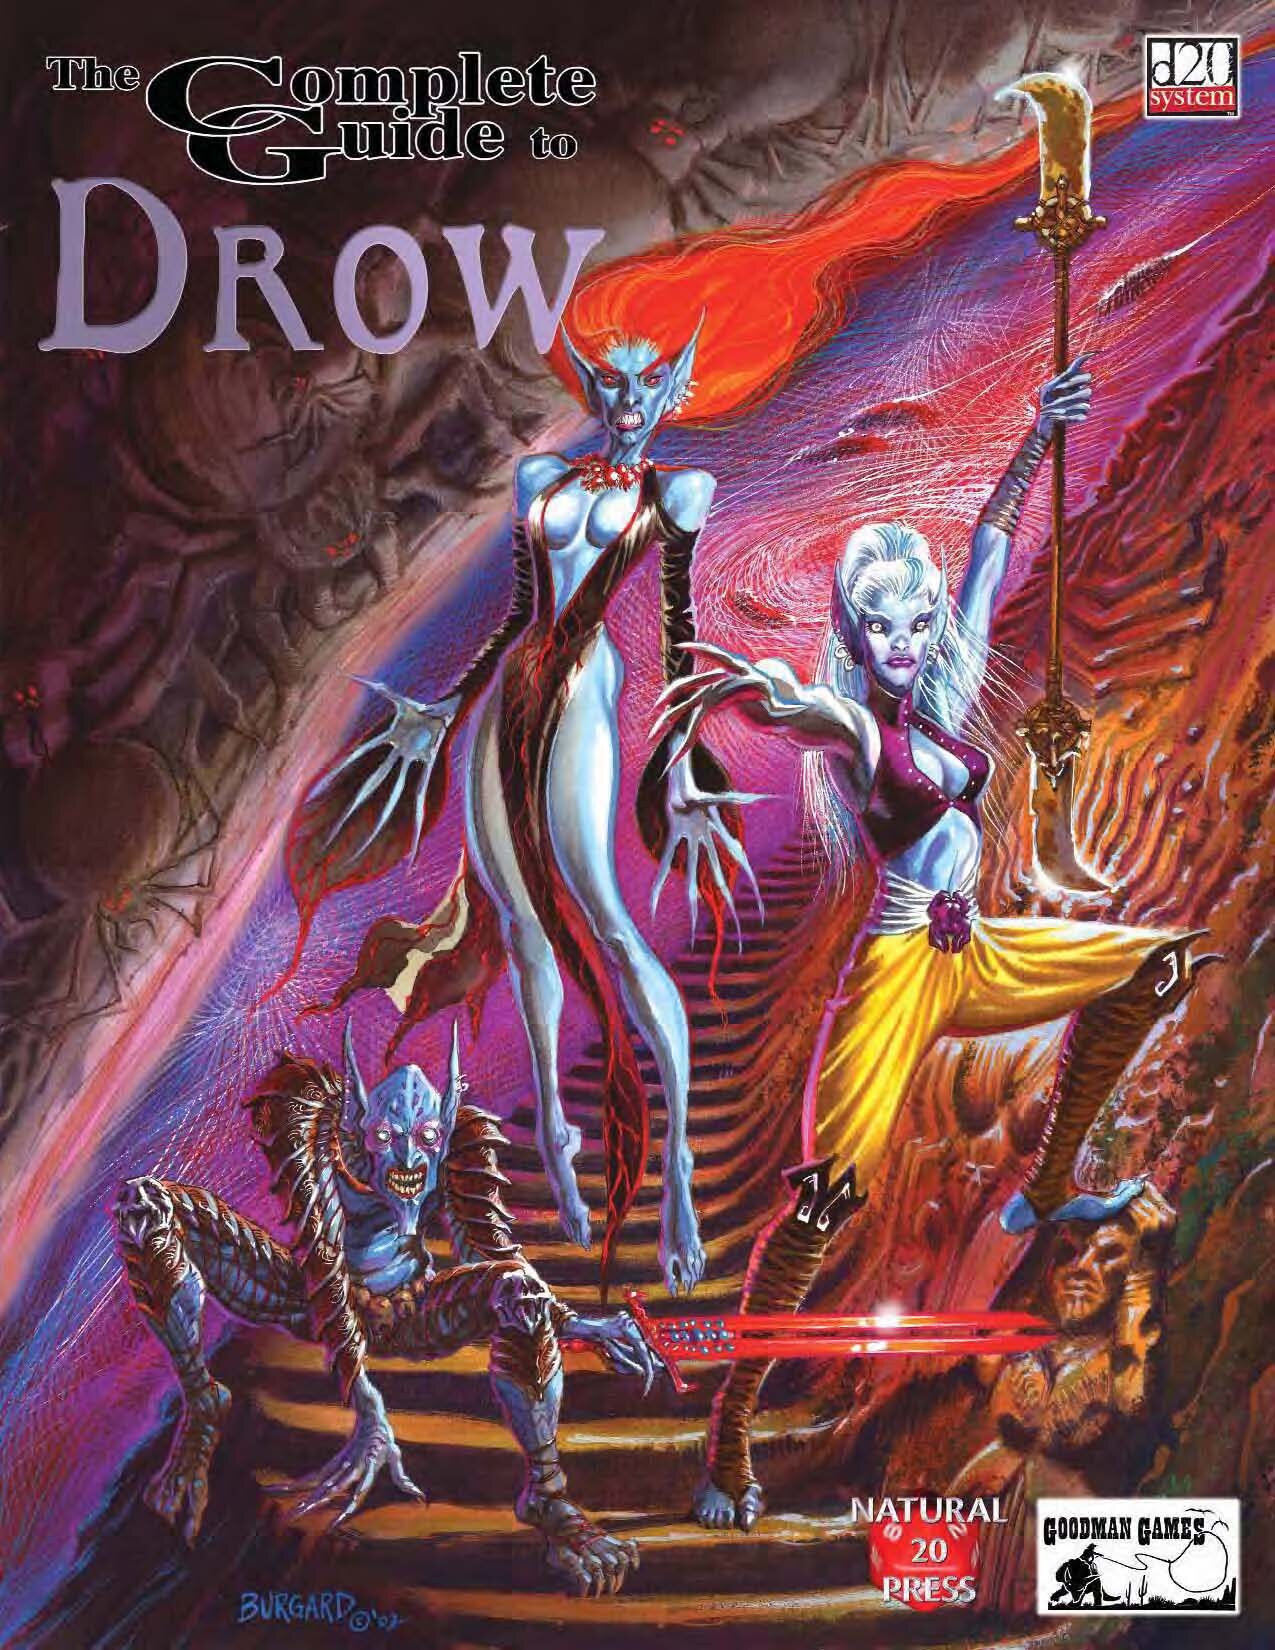 The Complete Guide To Drow